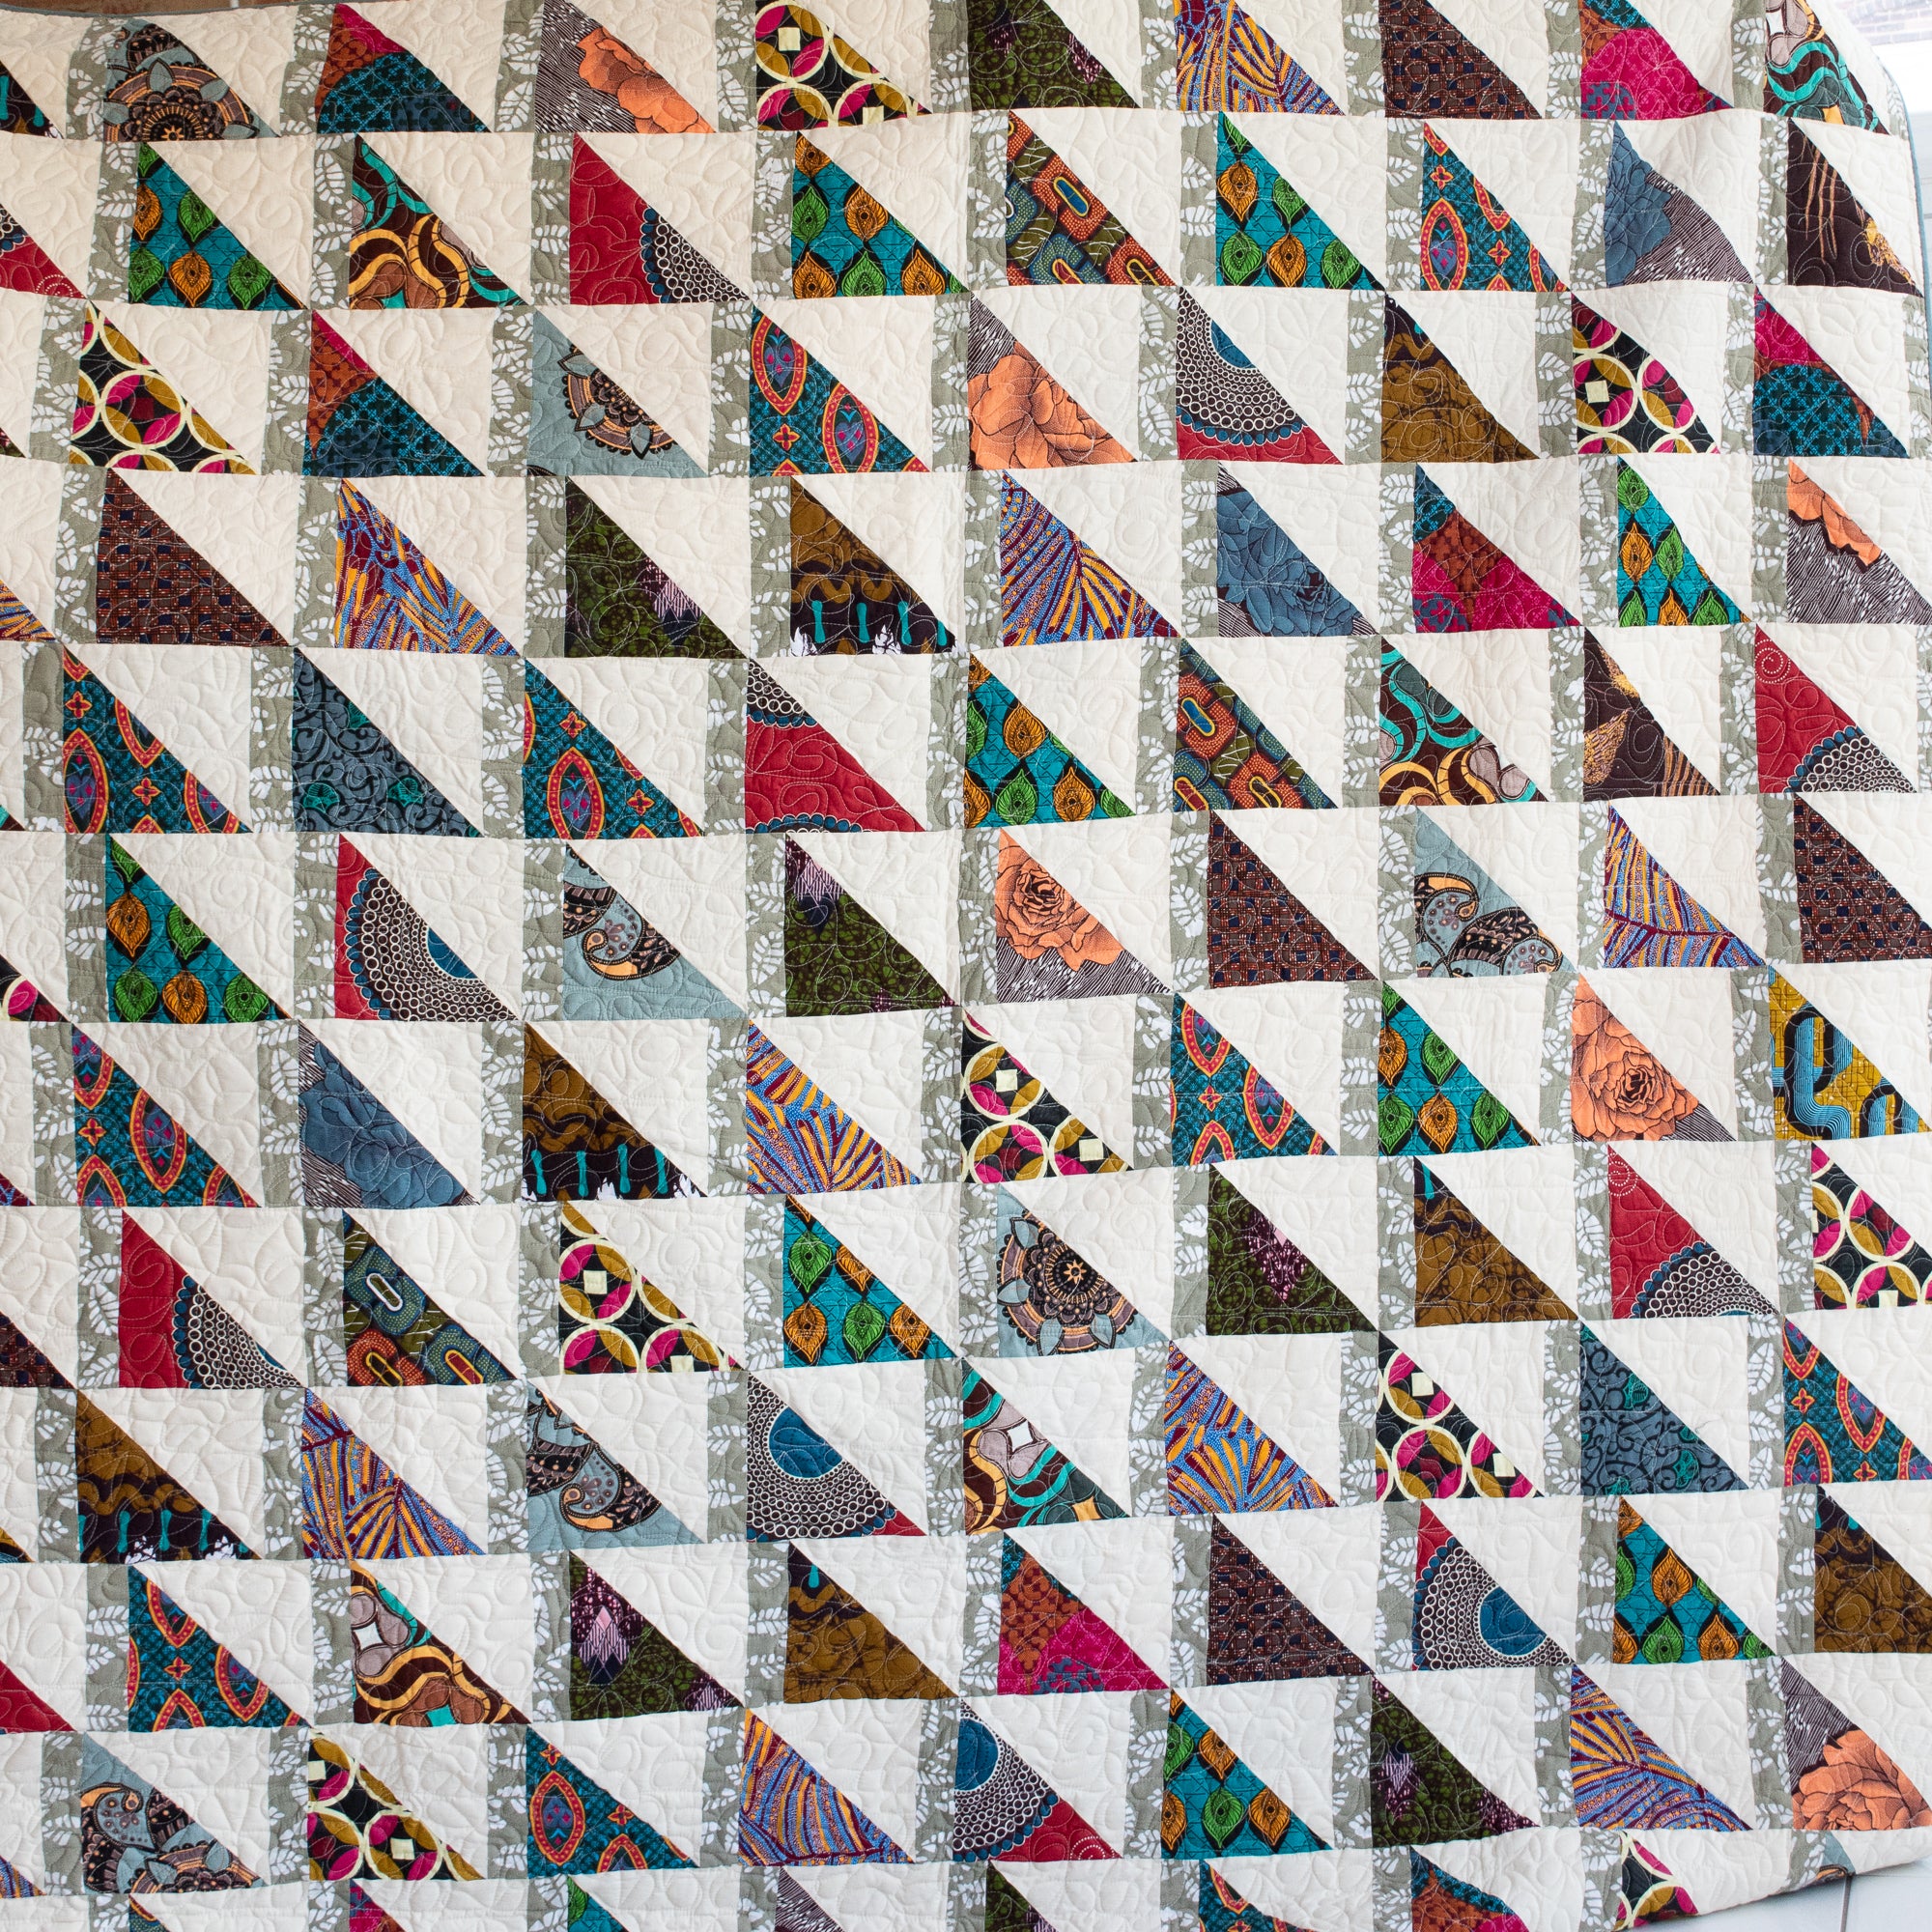 Colorful Kitenge pieces hand stitched together to make an Amani ya Juu quilt